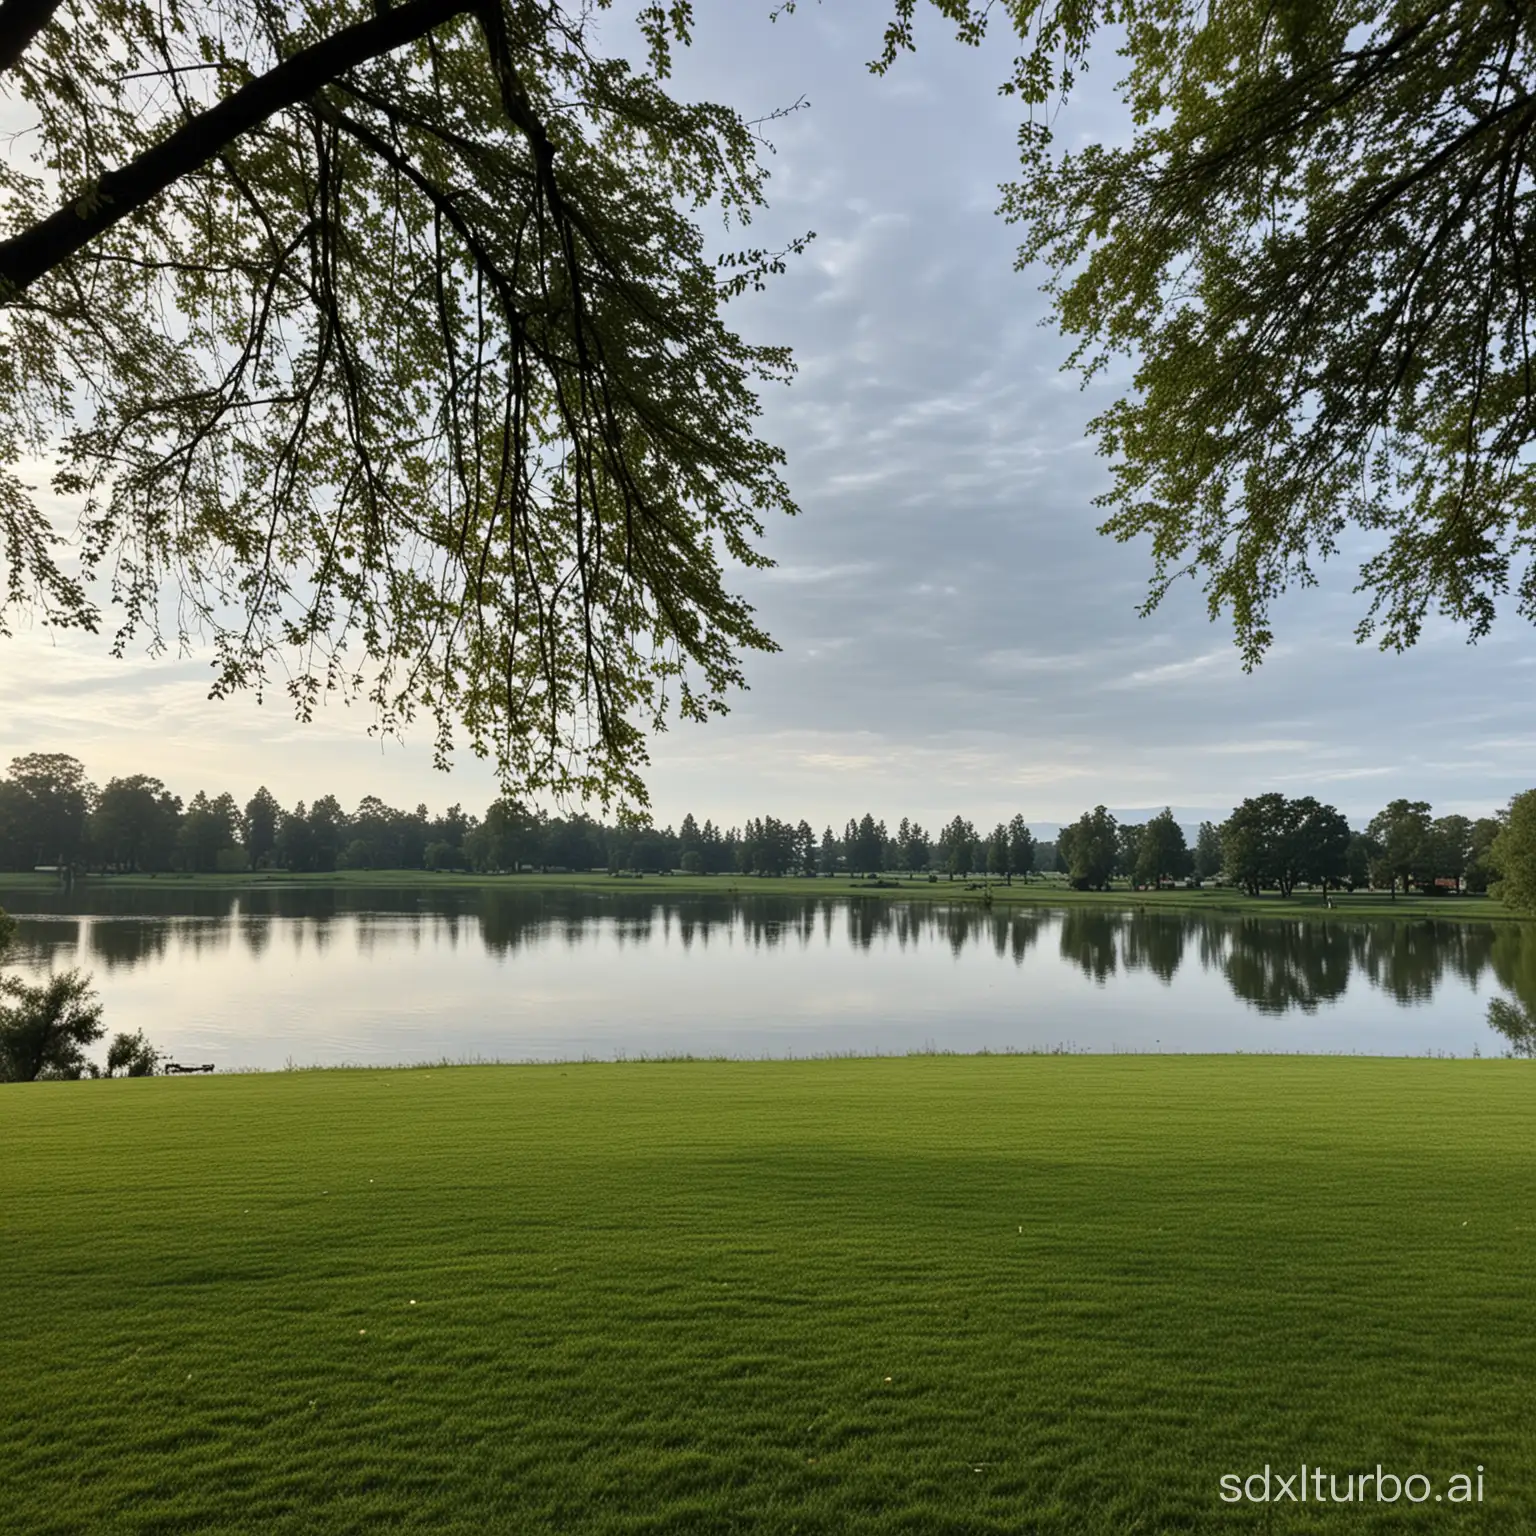 Tranquil-Lake-Scenery-with-a-Grassy-Lawn